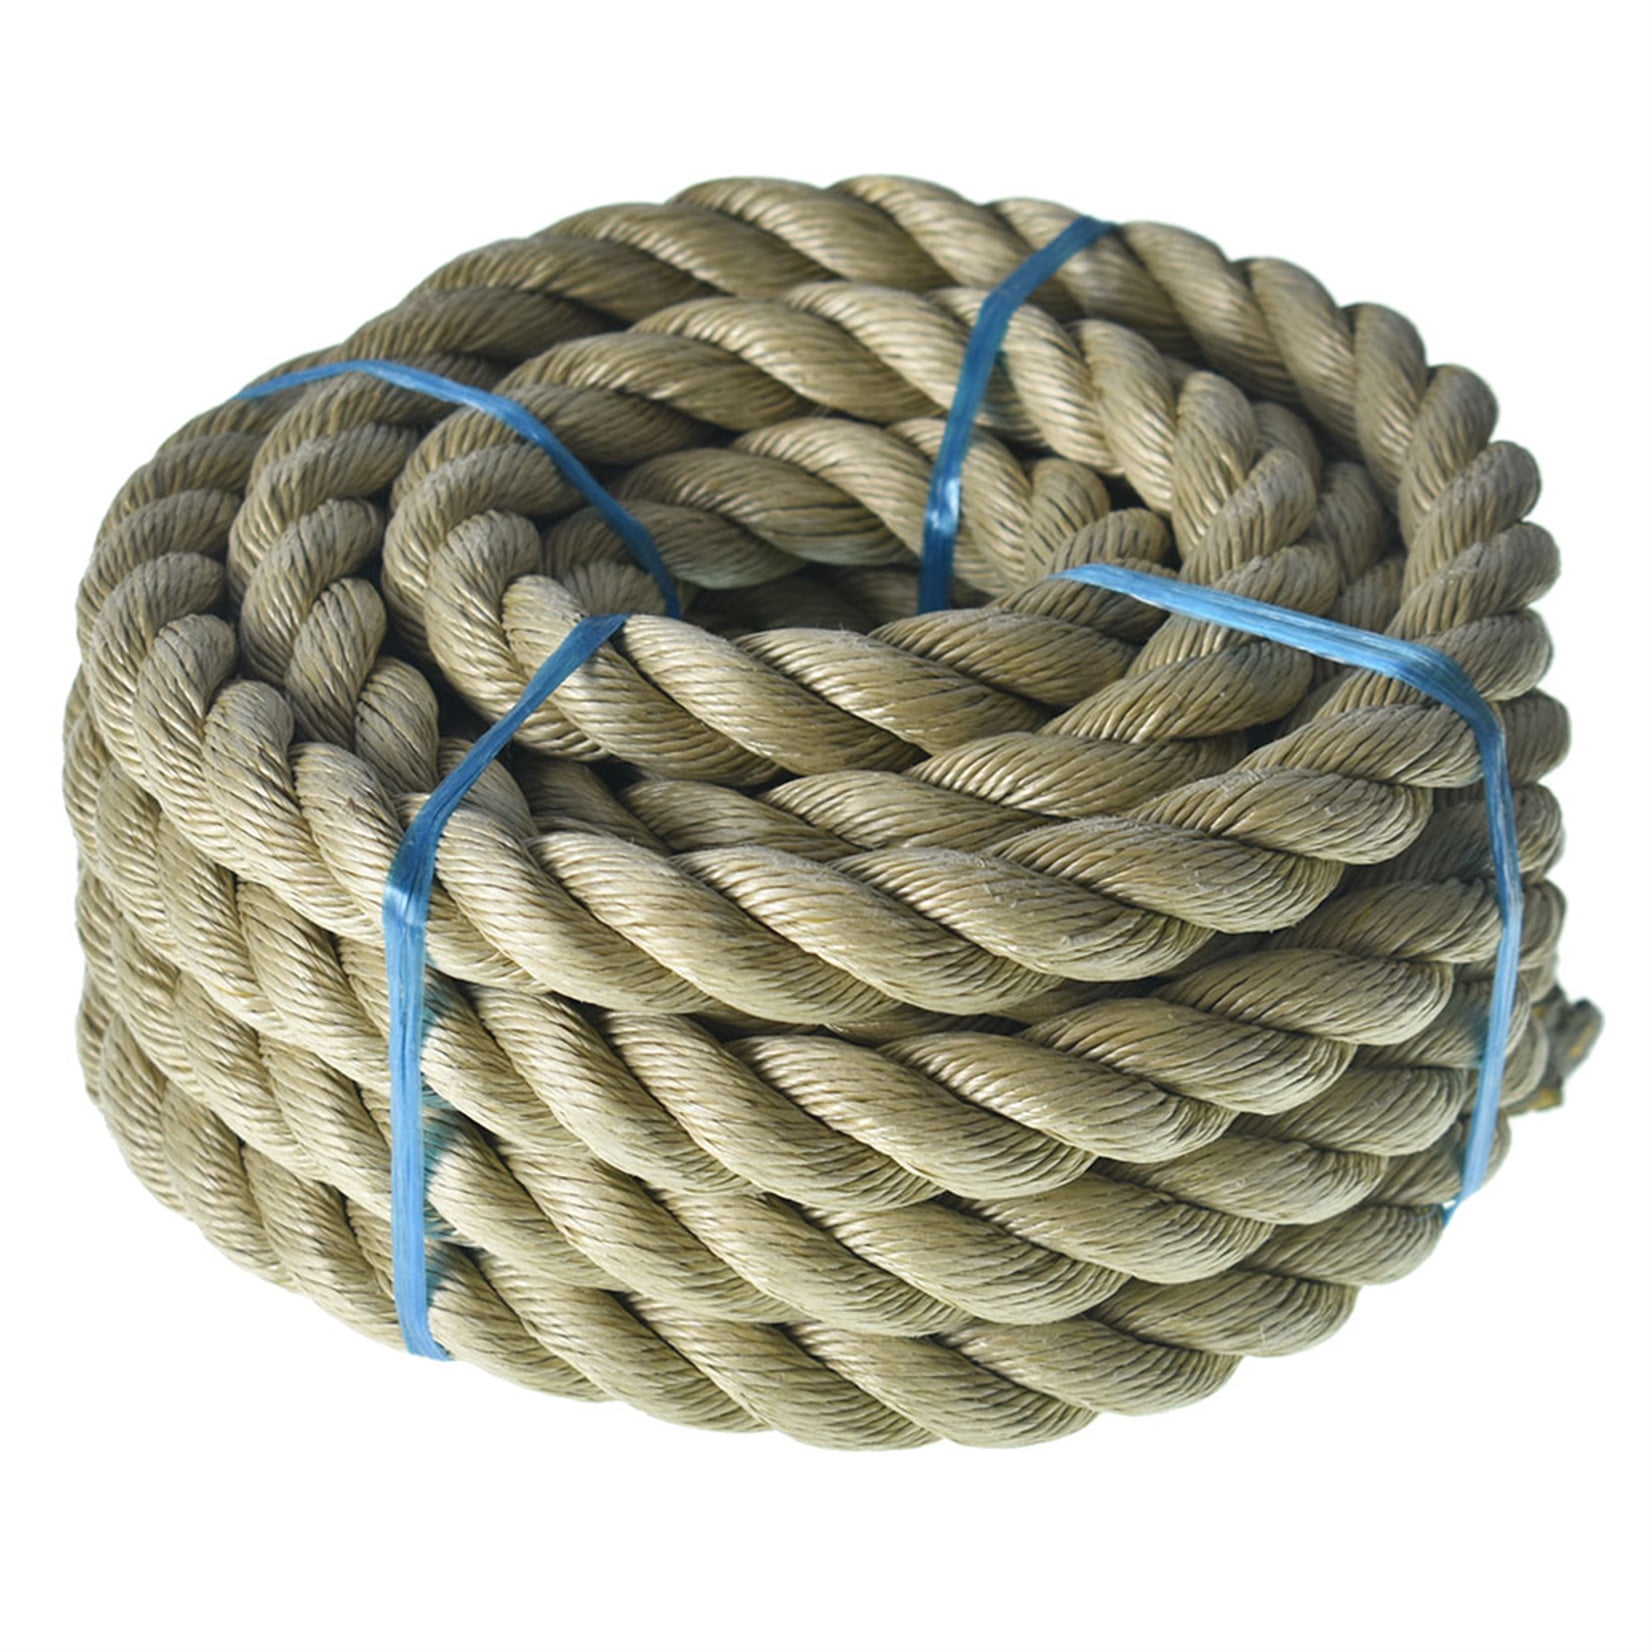  QUICKCLIP-PRO 550lb Heavy Duty Paracord/Parachute Cord - 7  Strand Core para Rope, Type 3 III Parachute Line 50', 100', 300', 1000' FT  Spools for Camping, Hiking, Survival (NEON Orange, 50FT) 